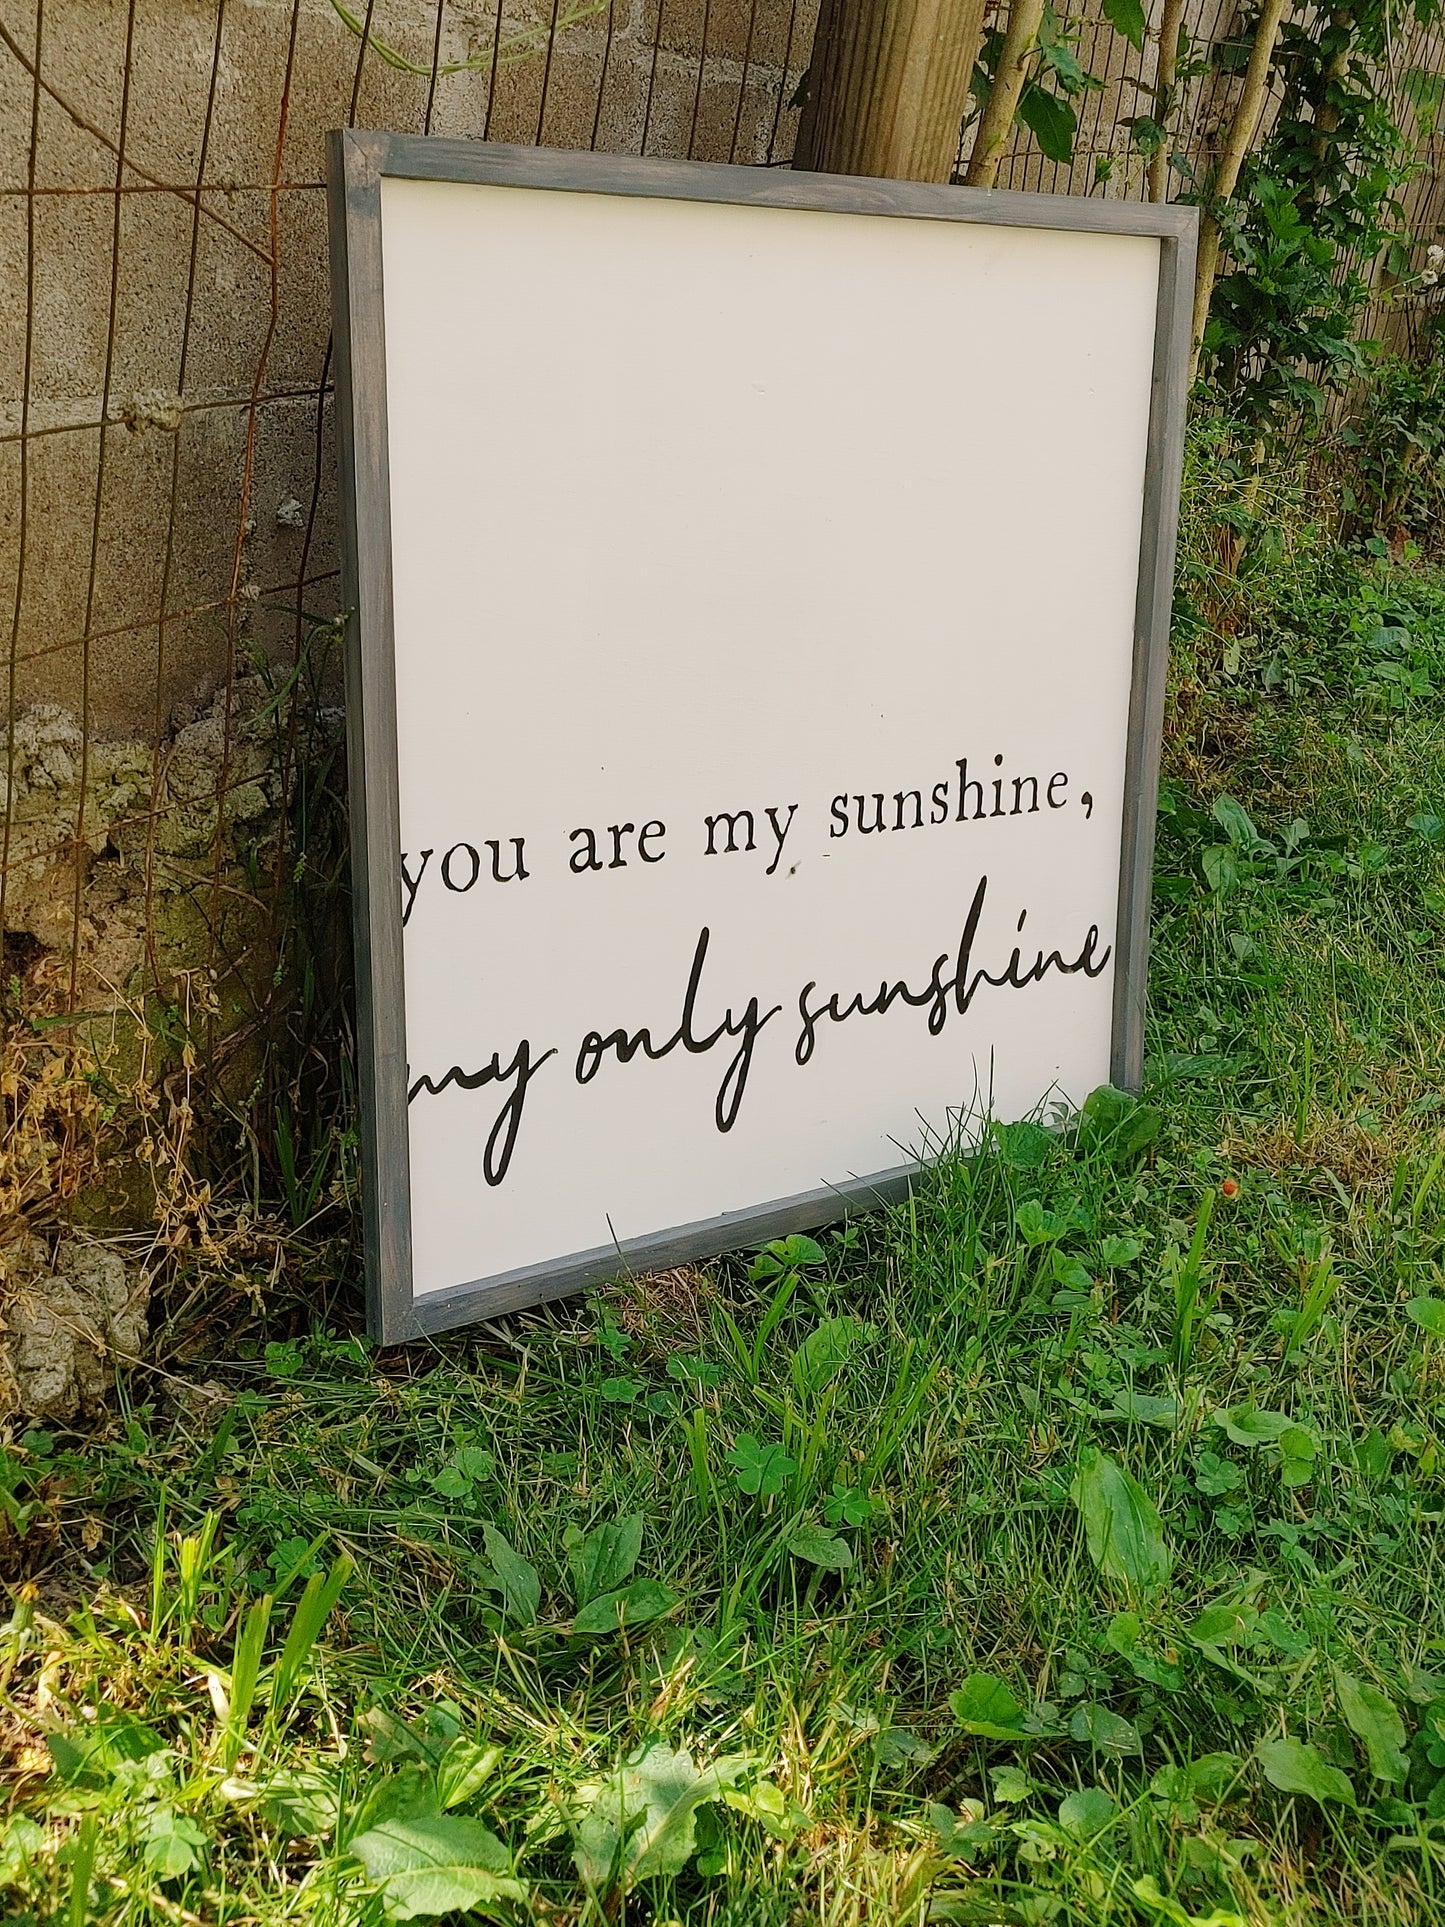 You are my sunshine, my only sunshine.